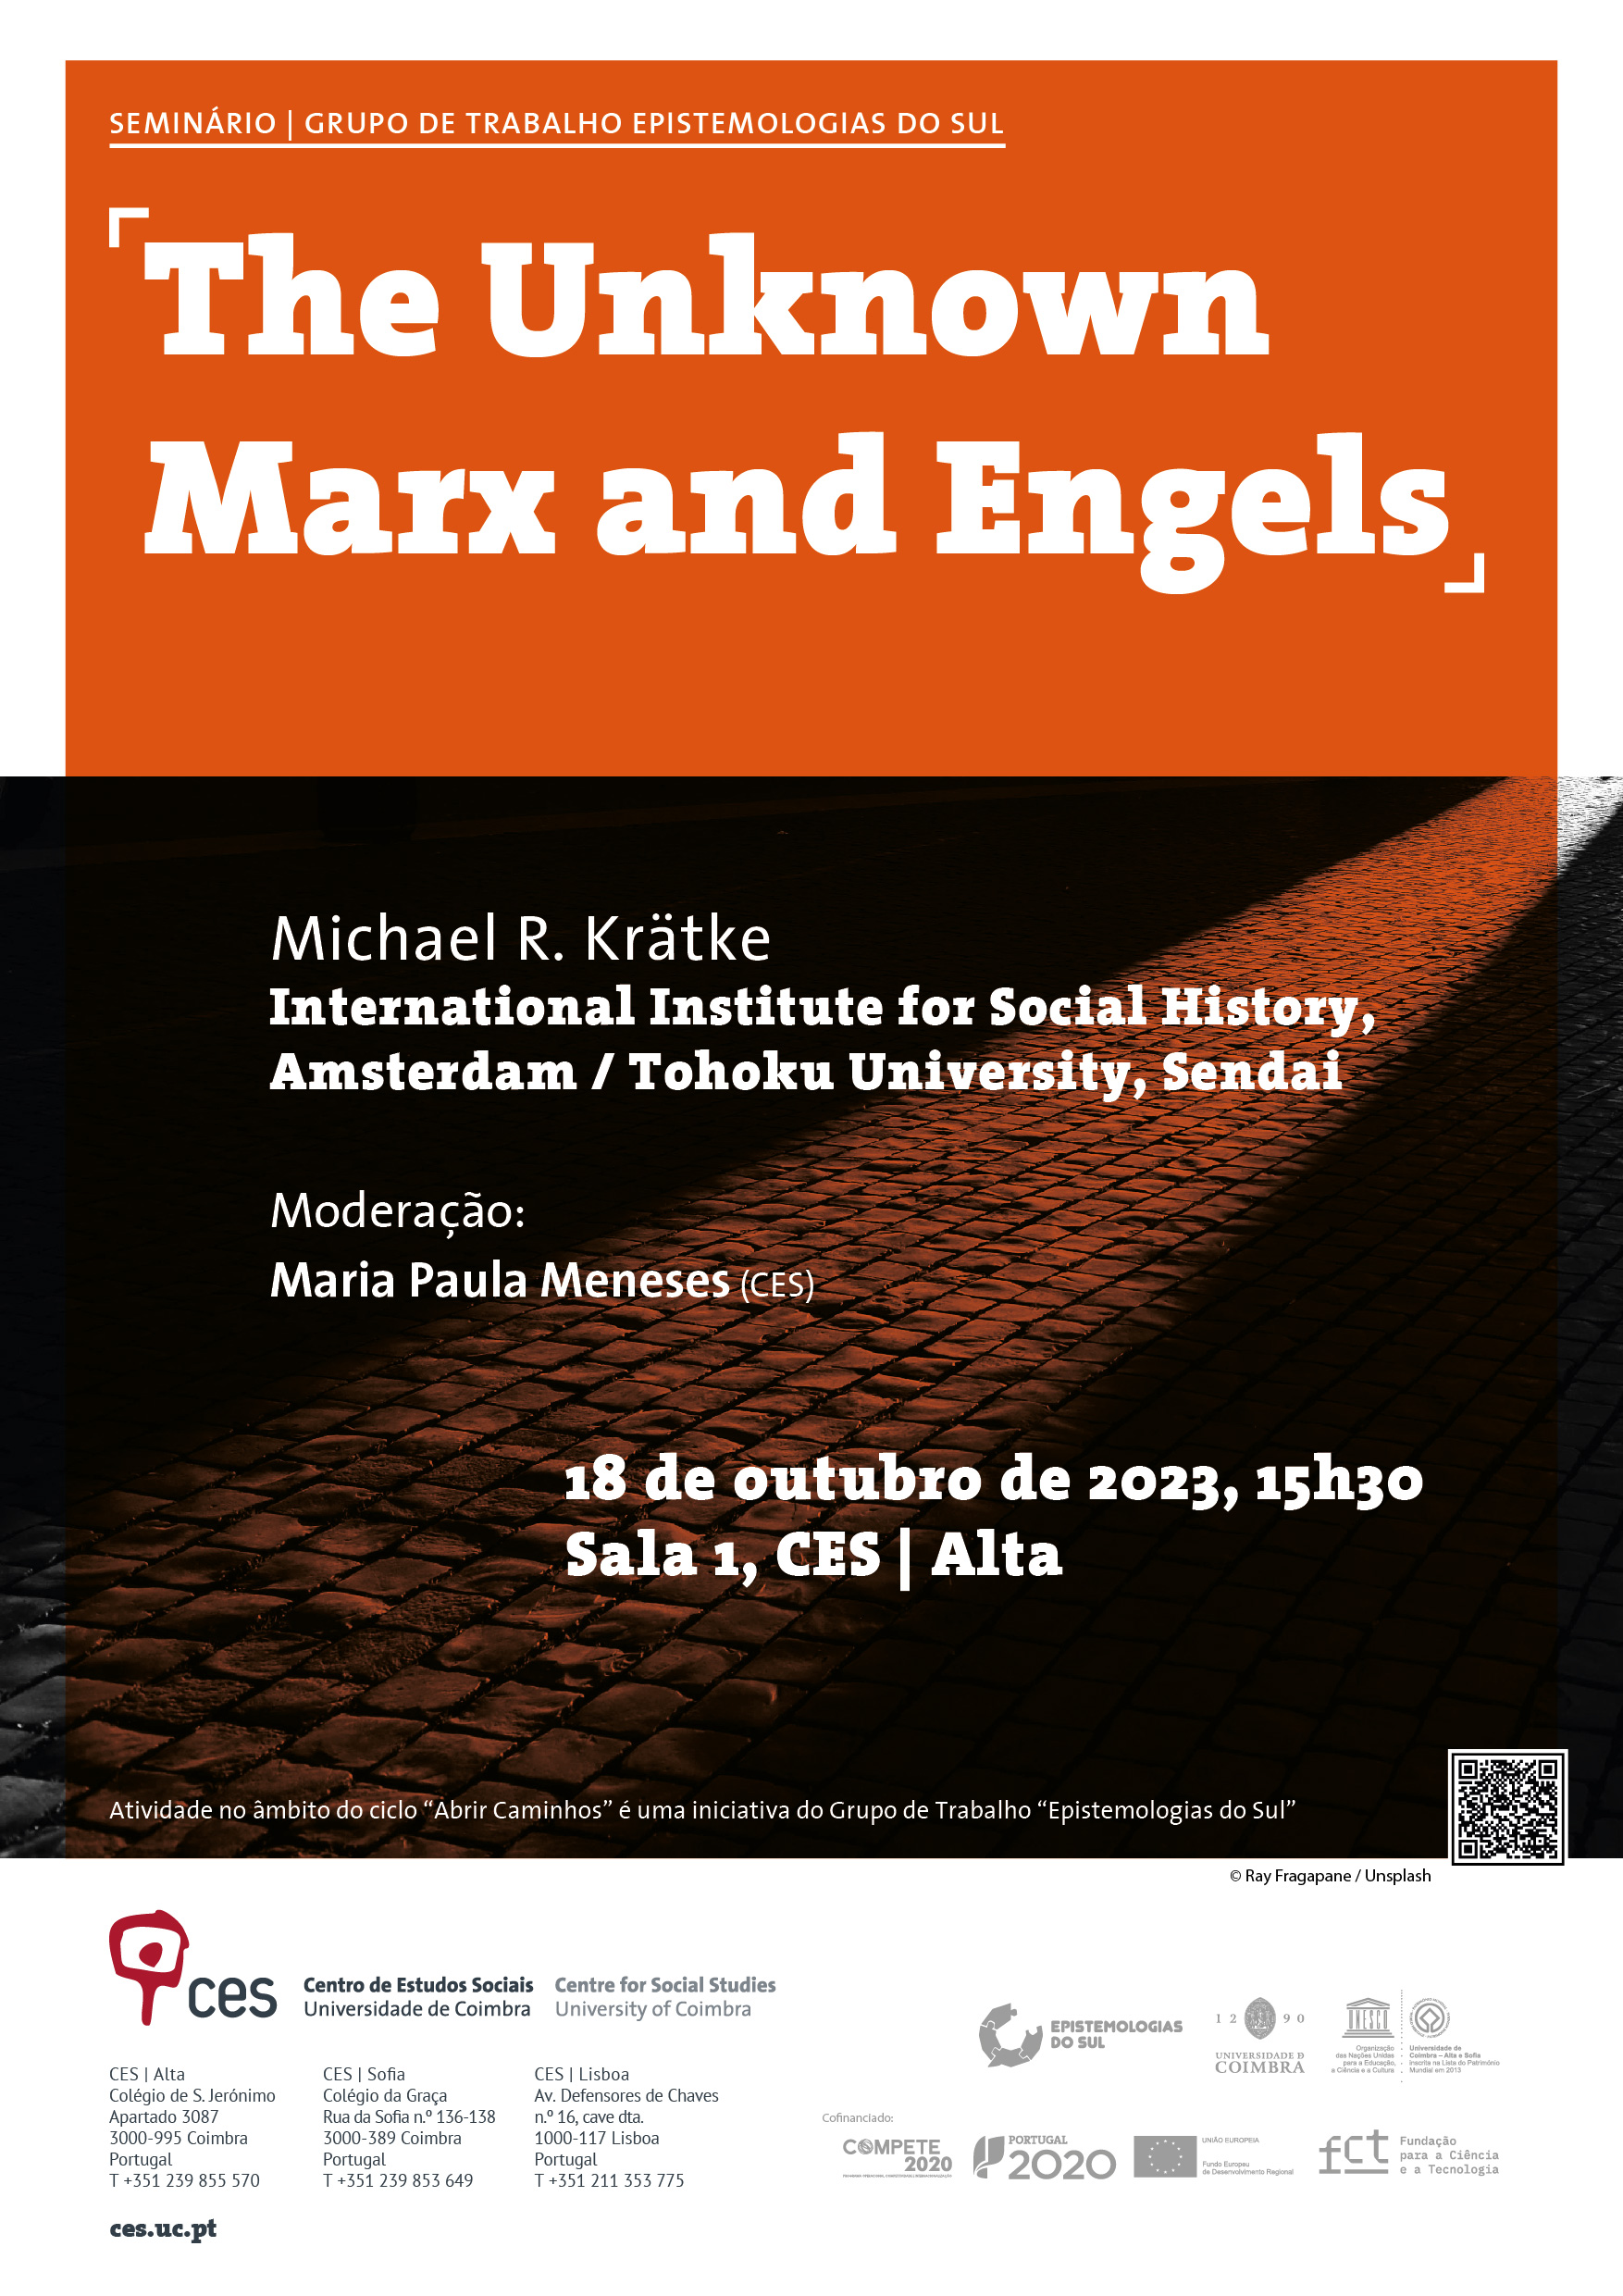 The Unknown Marx and Engels<span id="edit_43971"><script>$(function() { $('#edit_43971').load( "/myces/user/editobj.php?tipo=evento&id=43971" ); });</script></span>